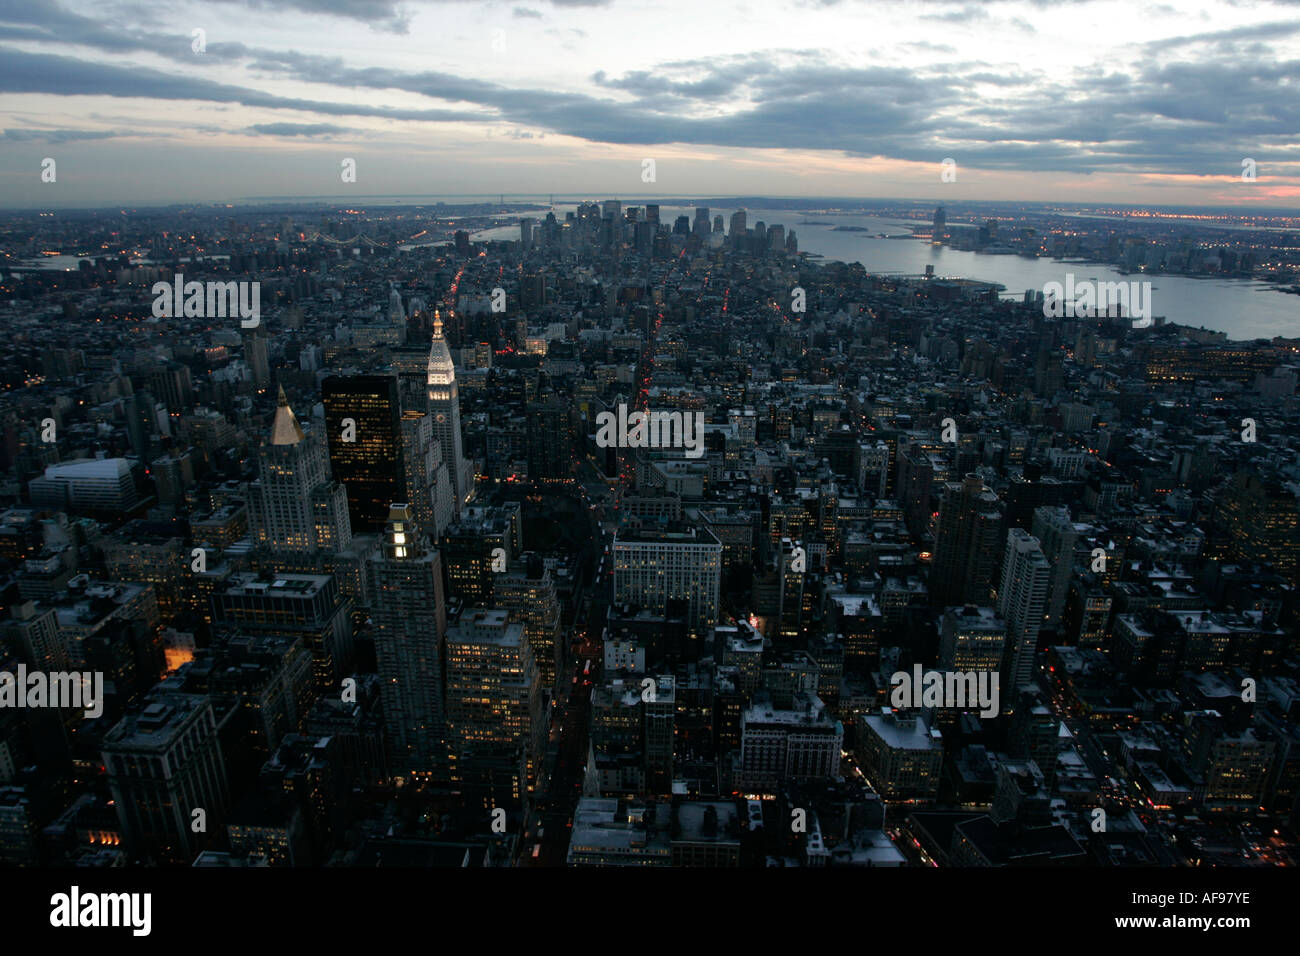 evening night view of south manhattan and sunset from observation deck 86th floor near the top of the empire state building Stock Photo